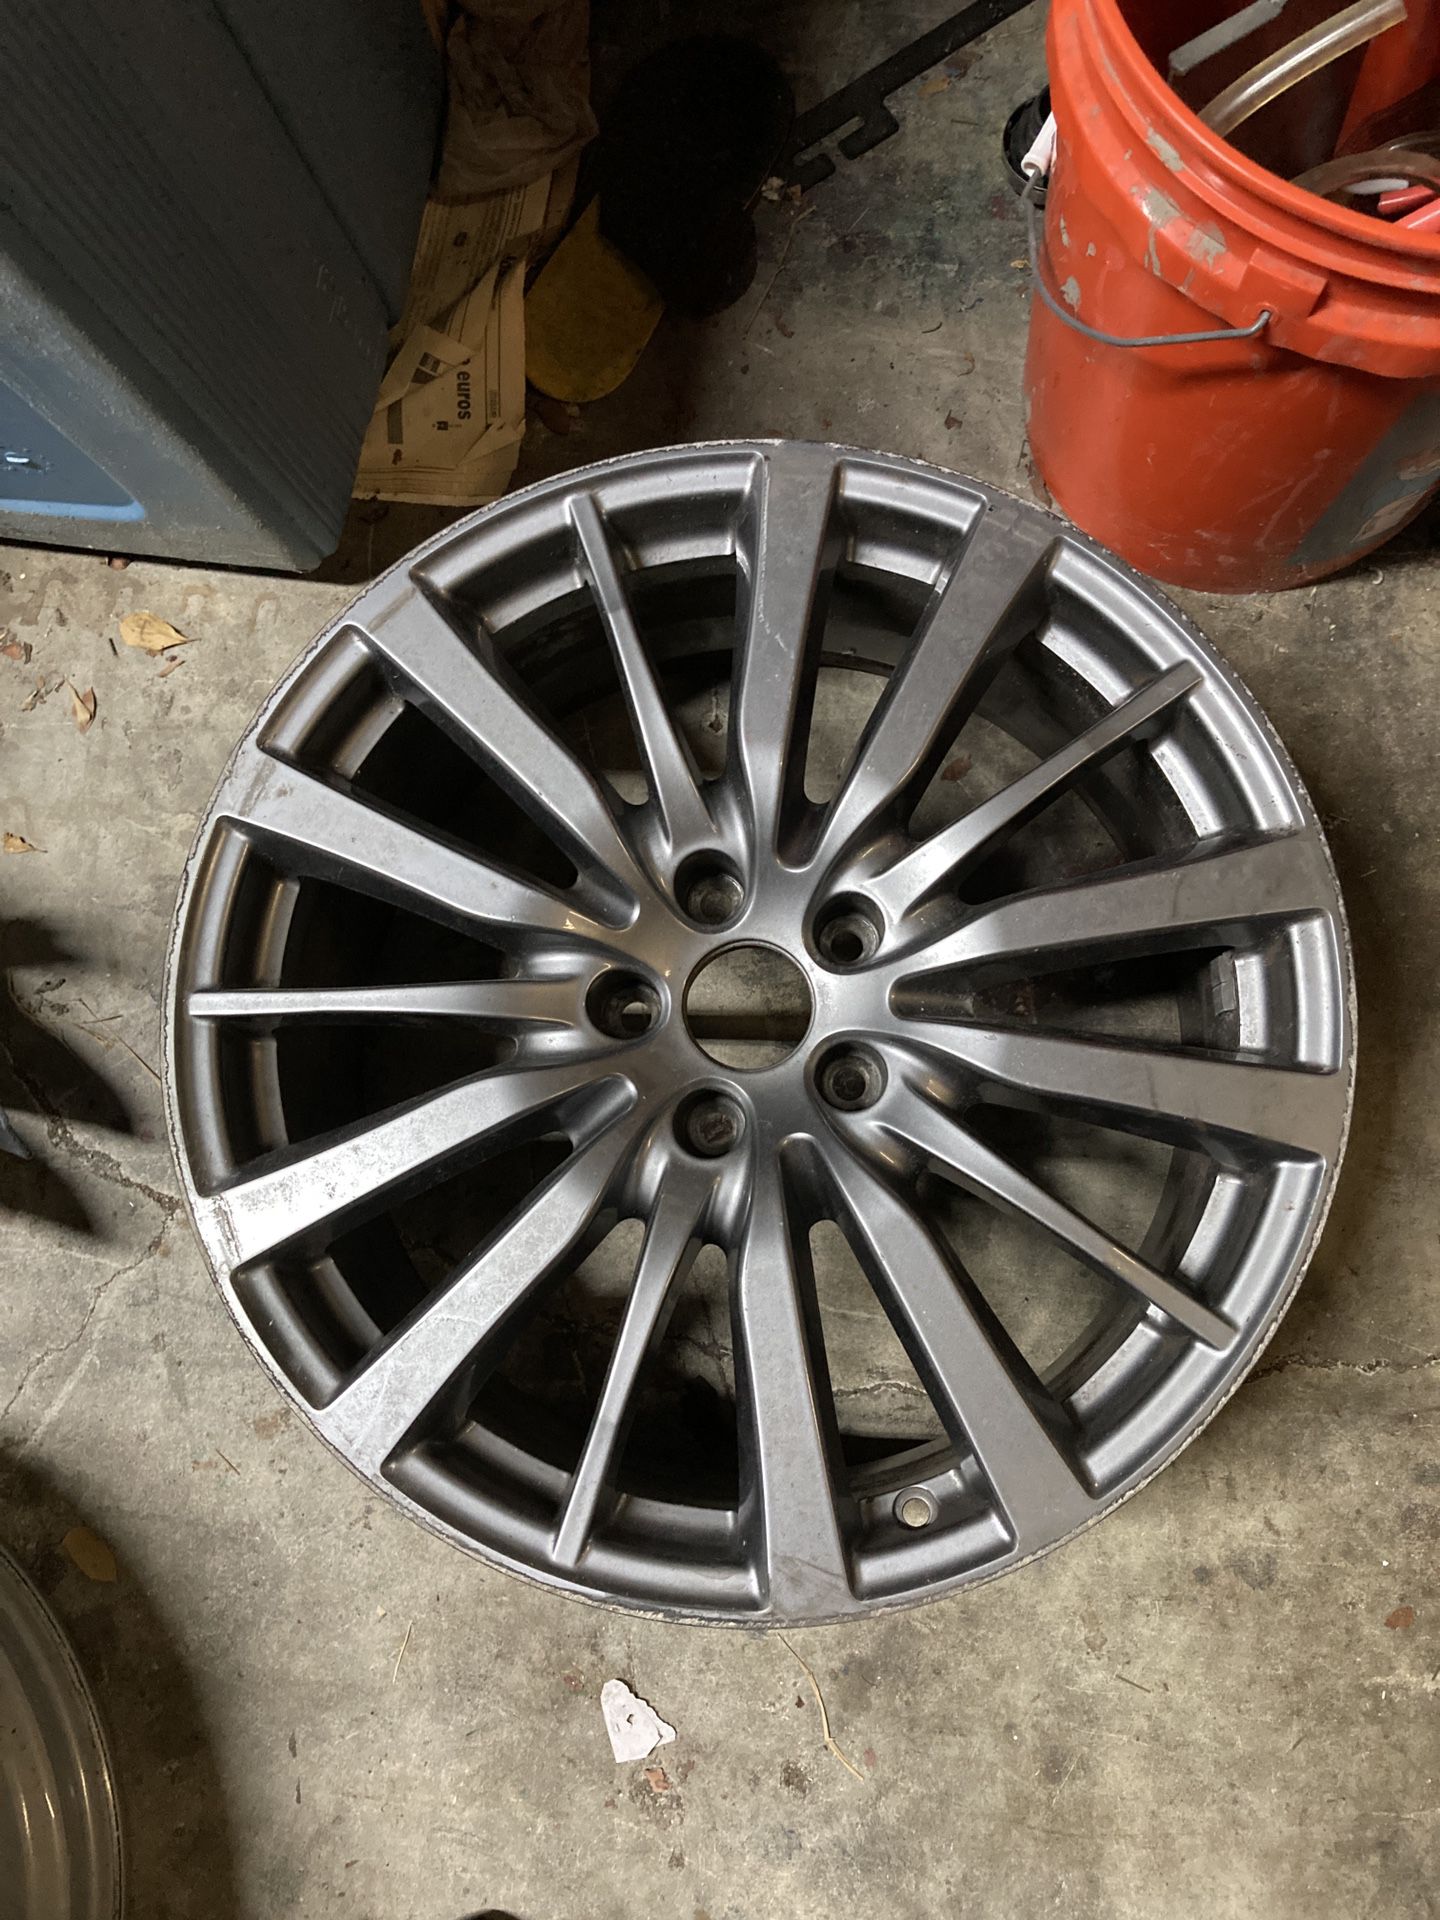 Maserati Gibley Quattroporte front wheel (contact info removed)52  8.5x19 